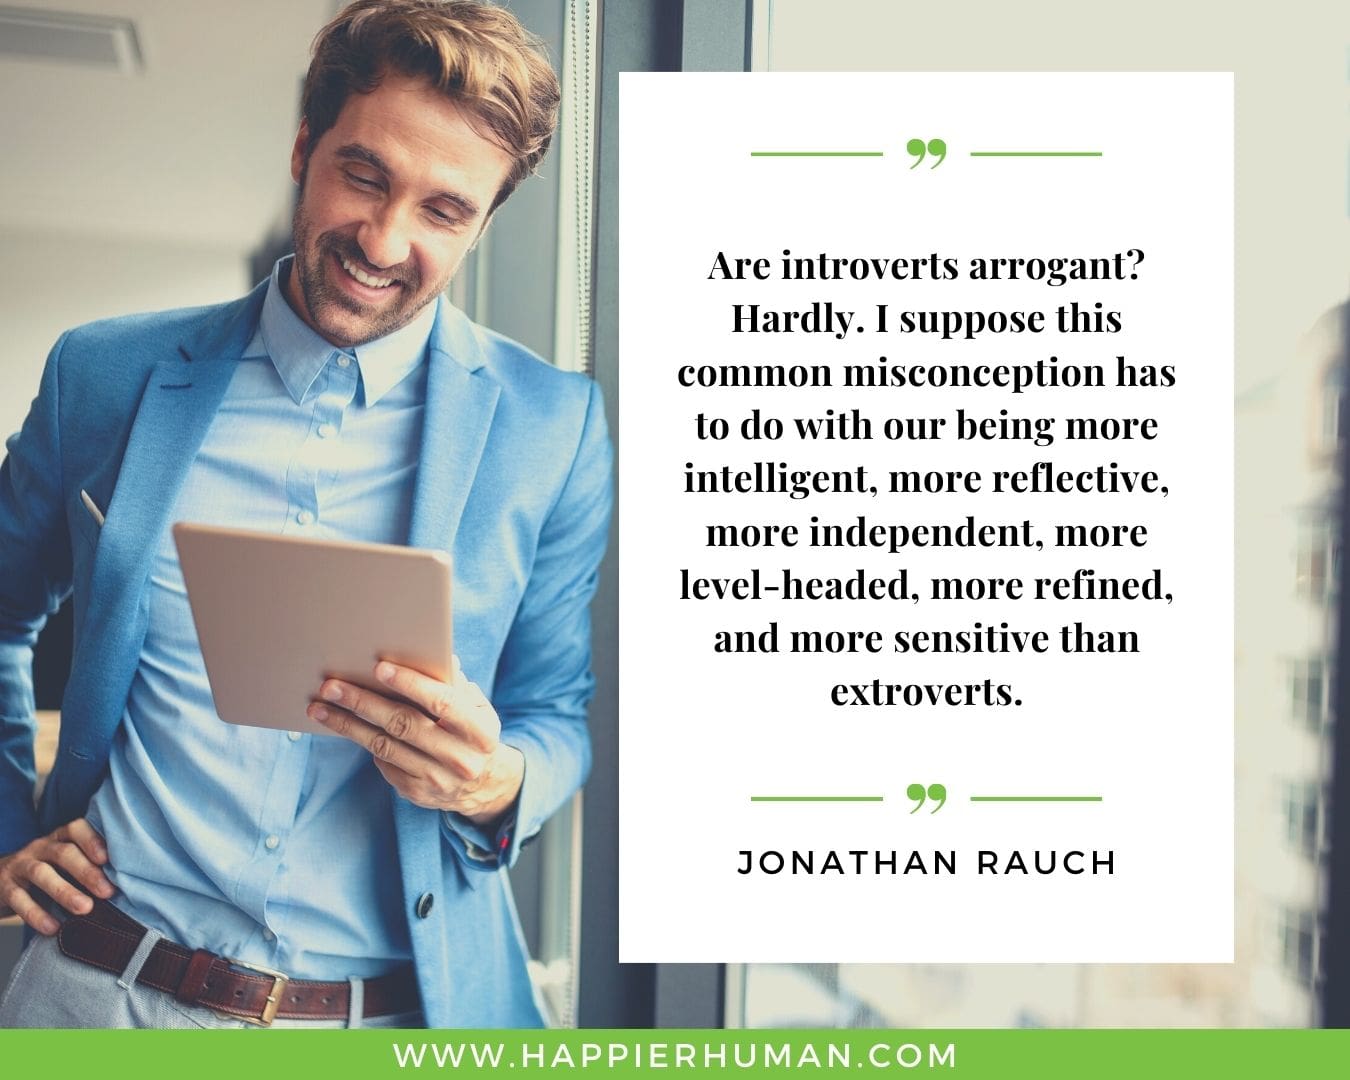 Introvert Quotes - “Are introverts arrogant? Hardly. I suppose this common misconception has to do with our being more intelligent, more reflective, more independent, more level-headed, more refined, and more sensitive than extroverts.” – Jonathan Rauch